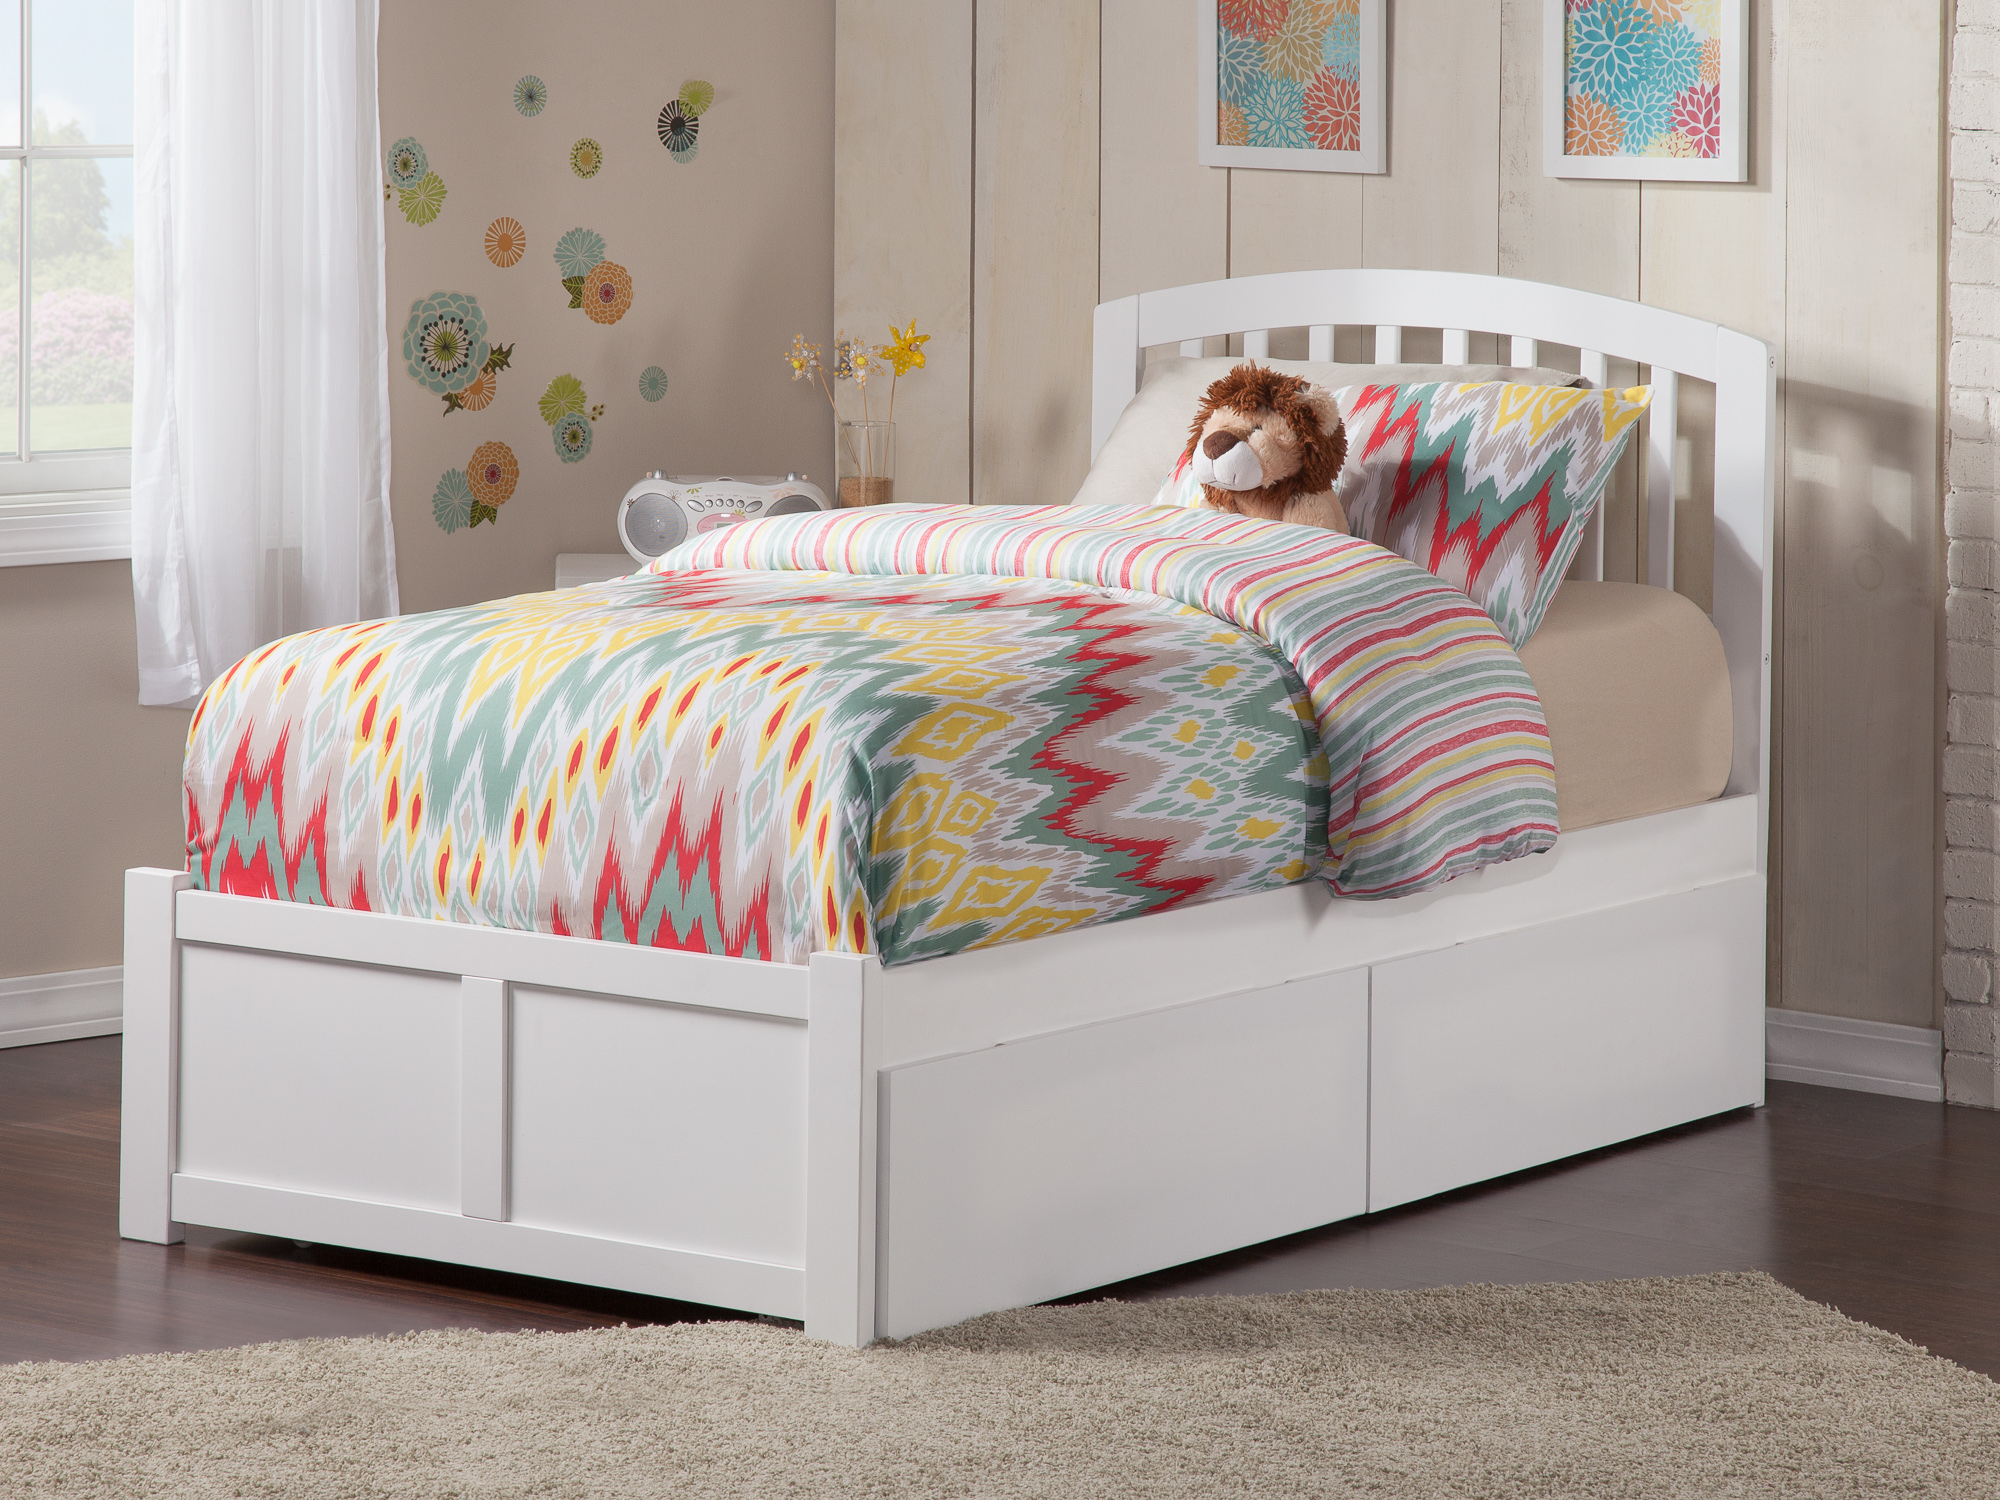 White Twin Bed With Storage Visualhunt, White Twin Mate’s Platform Storage Bed With 3 Drawers